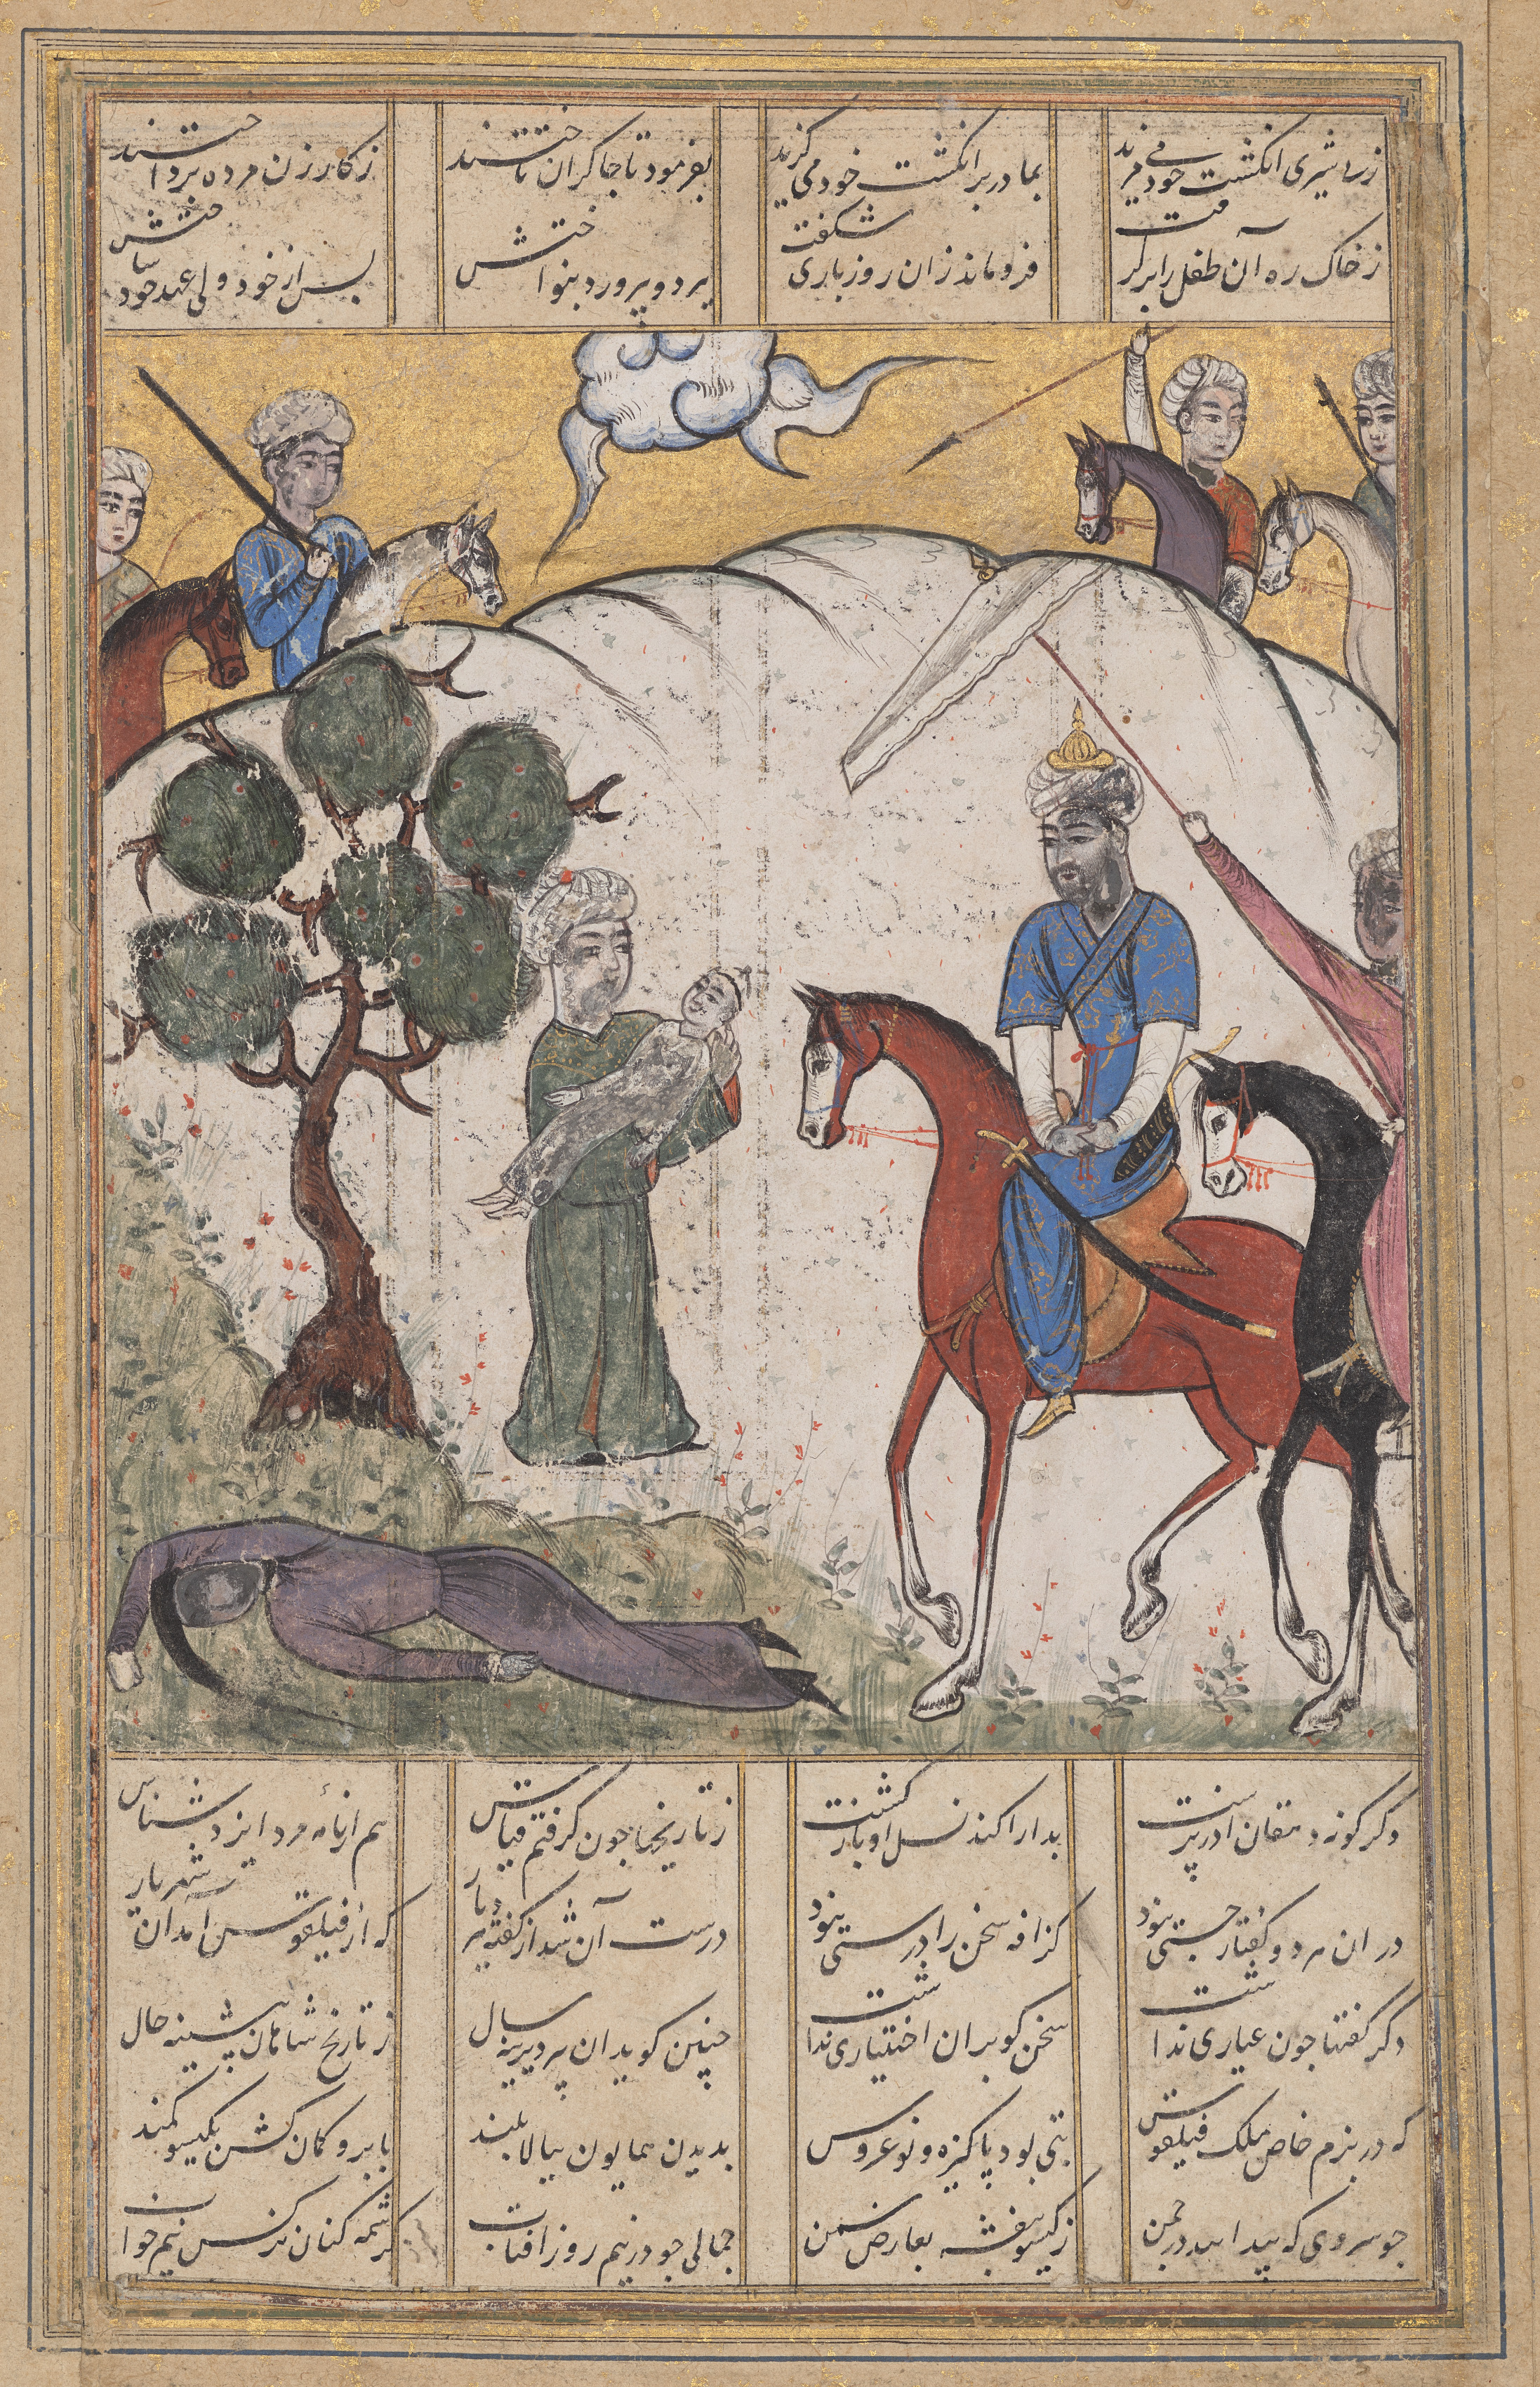 A scene of the life of Alexander from the Sharaf-nameh